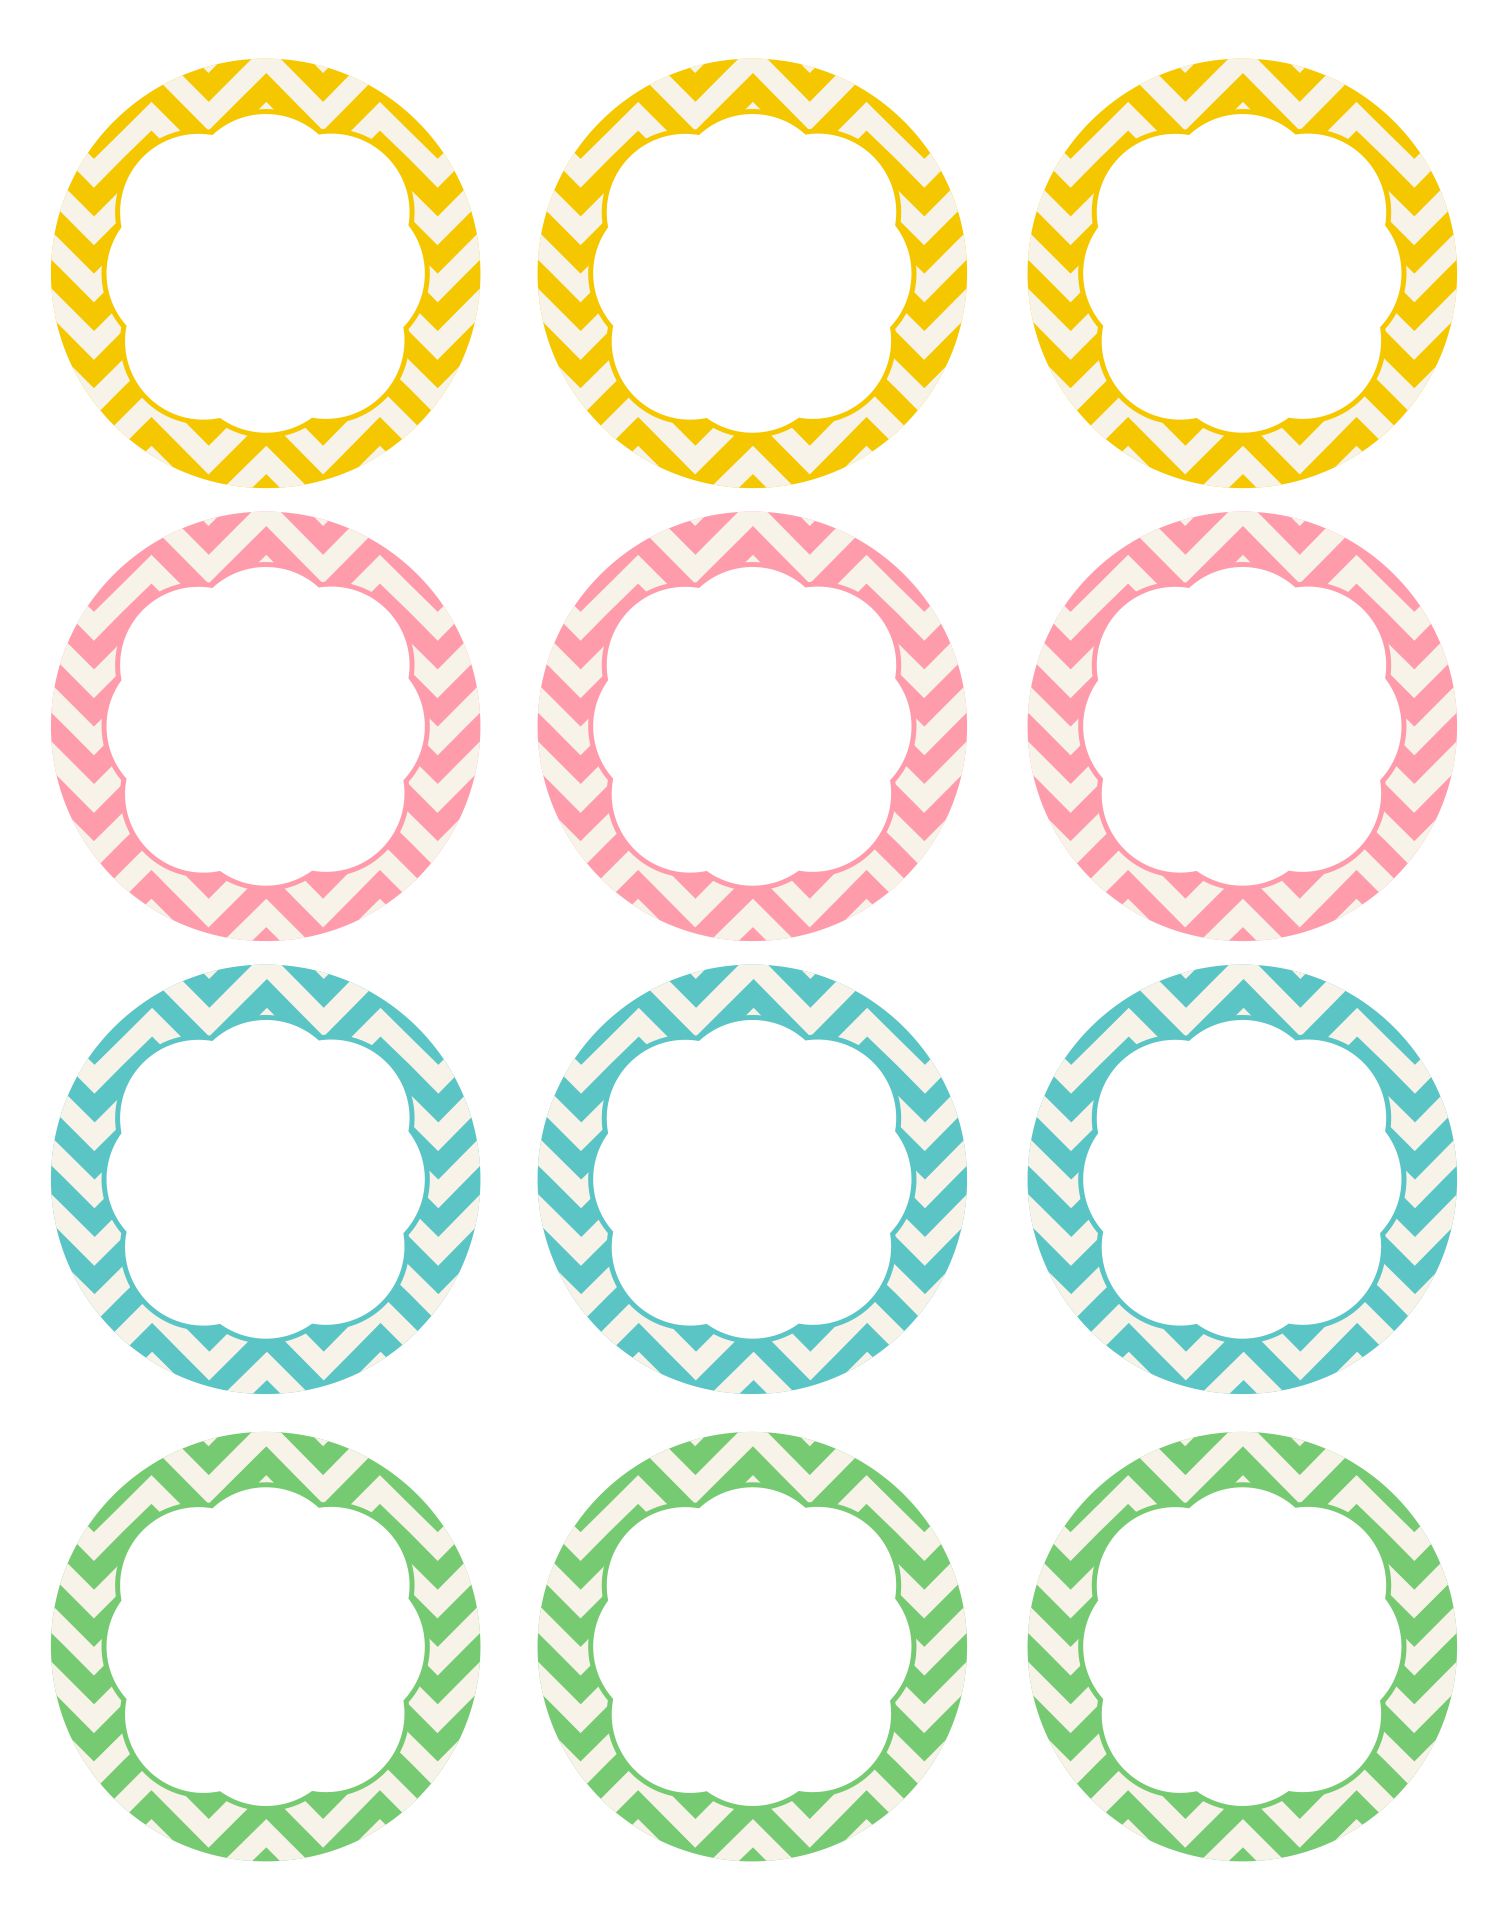 6-best-images-of-free-printable-cupcake-topper-templates-free